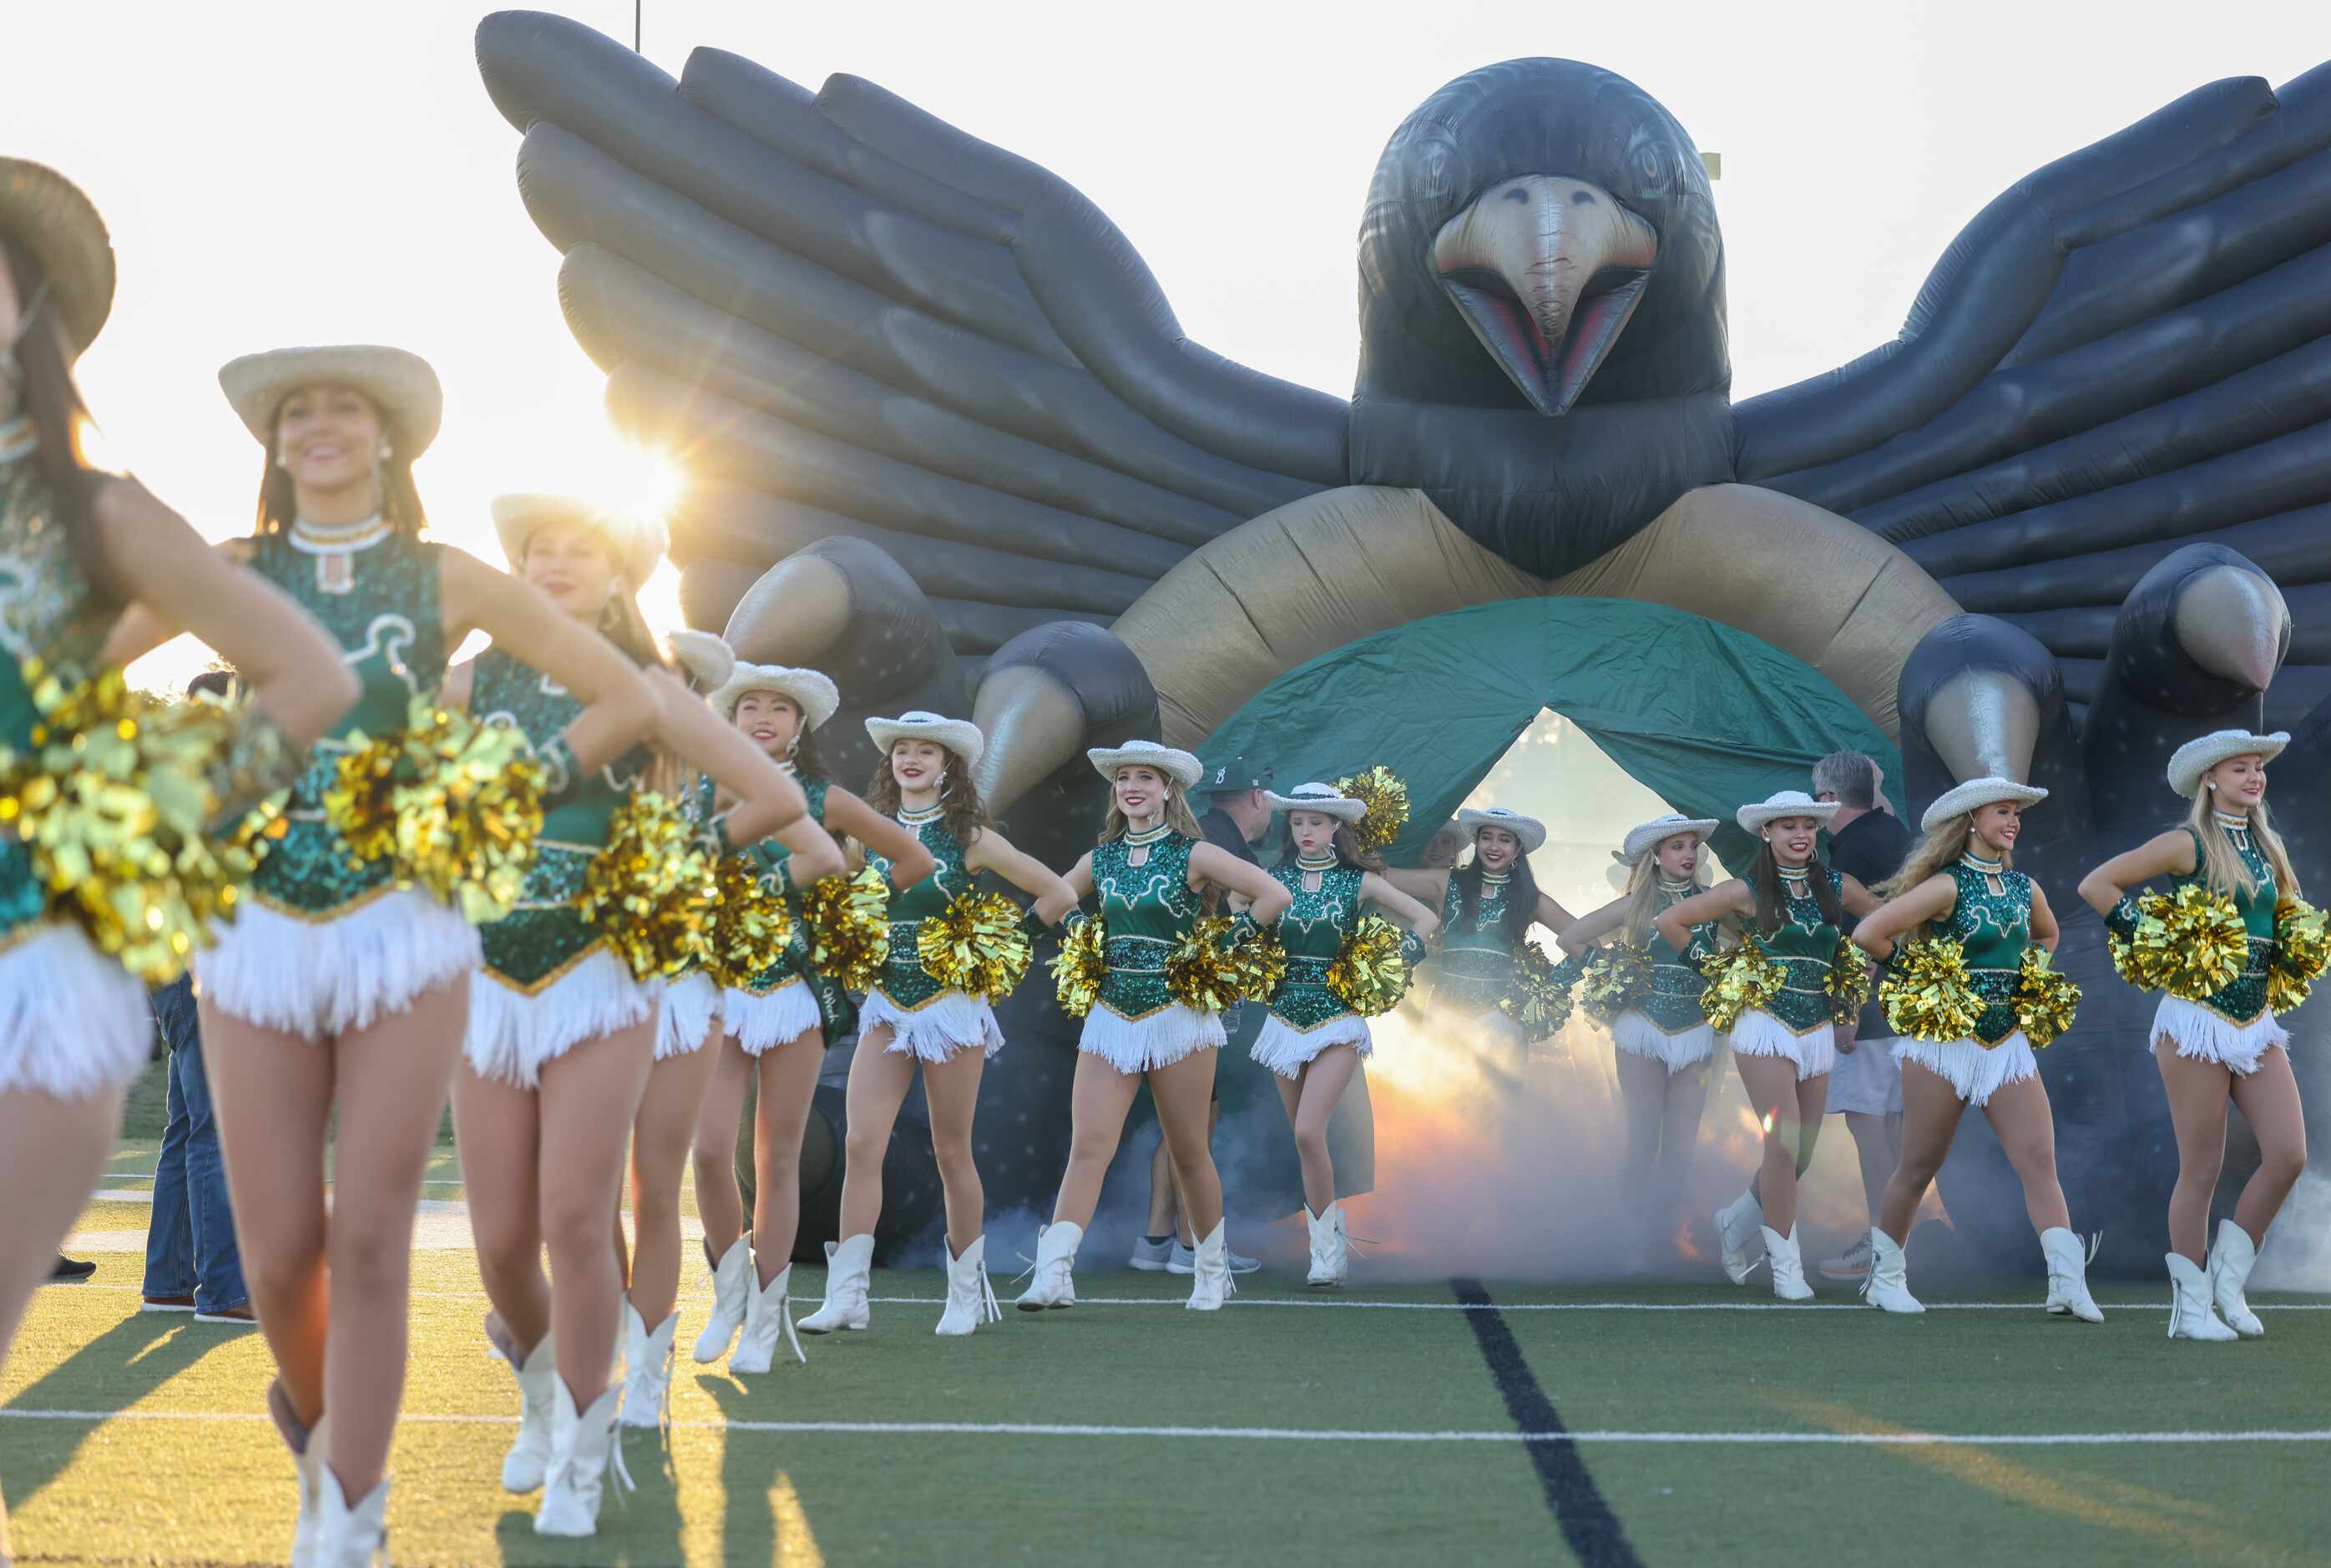 Birdville’s drill team enters the field ahead of their team at the start of a game against...